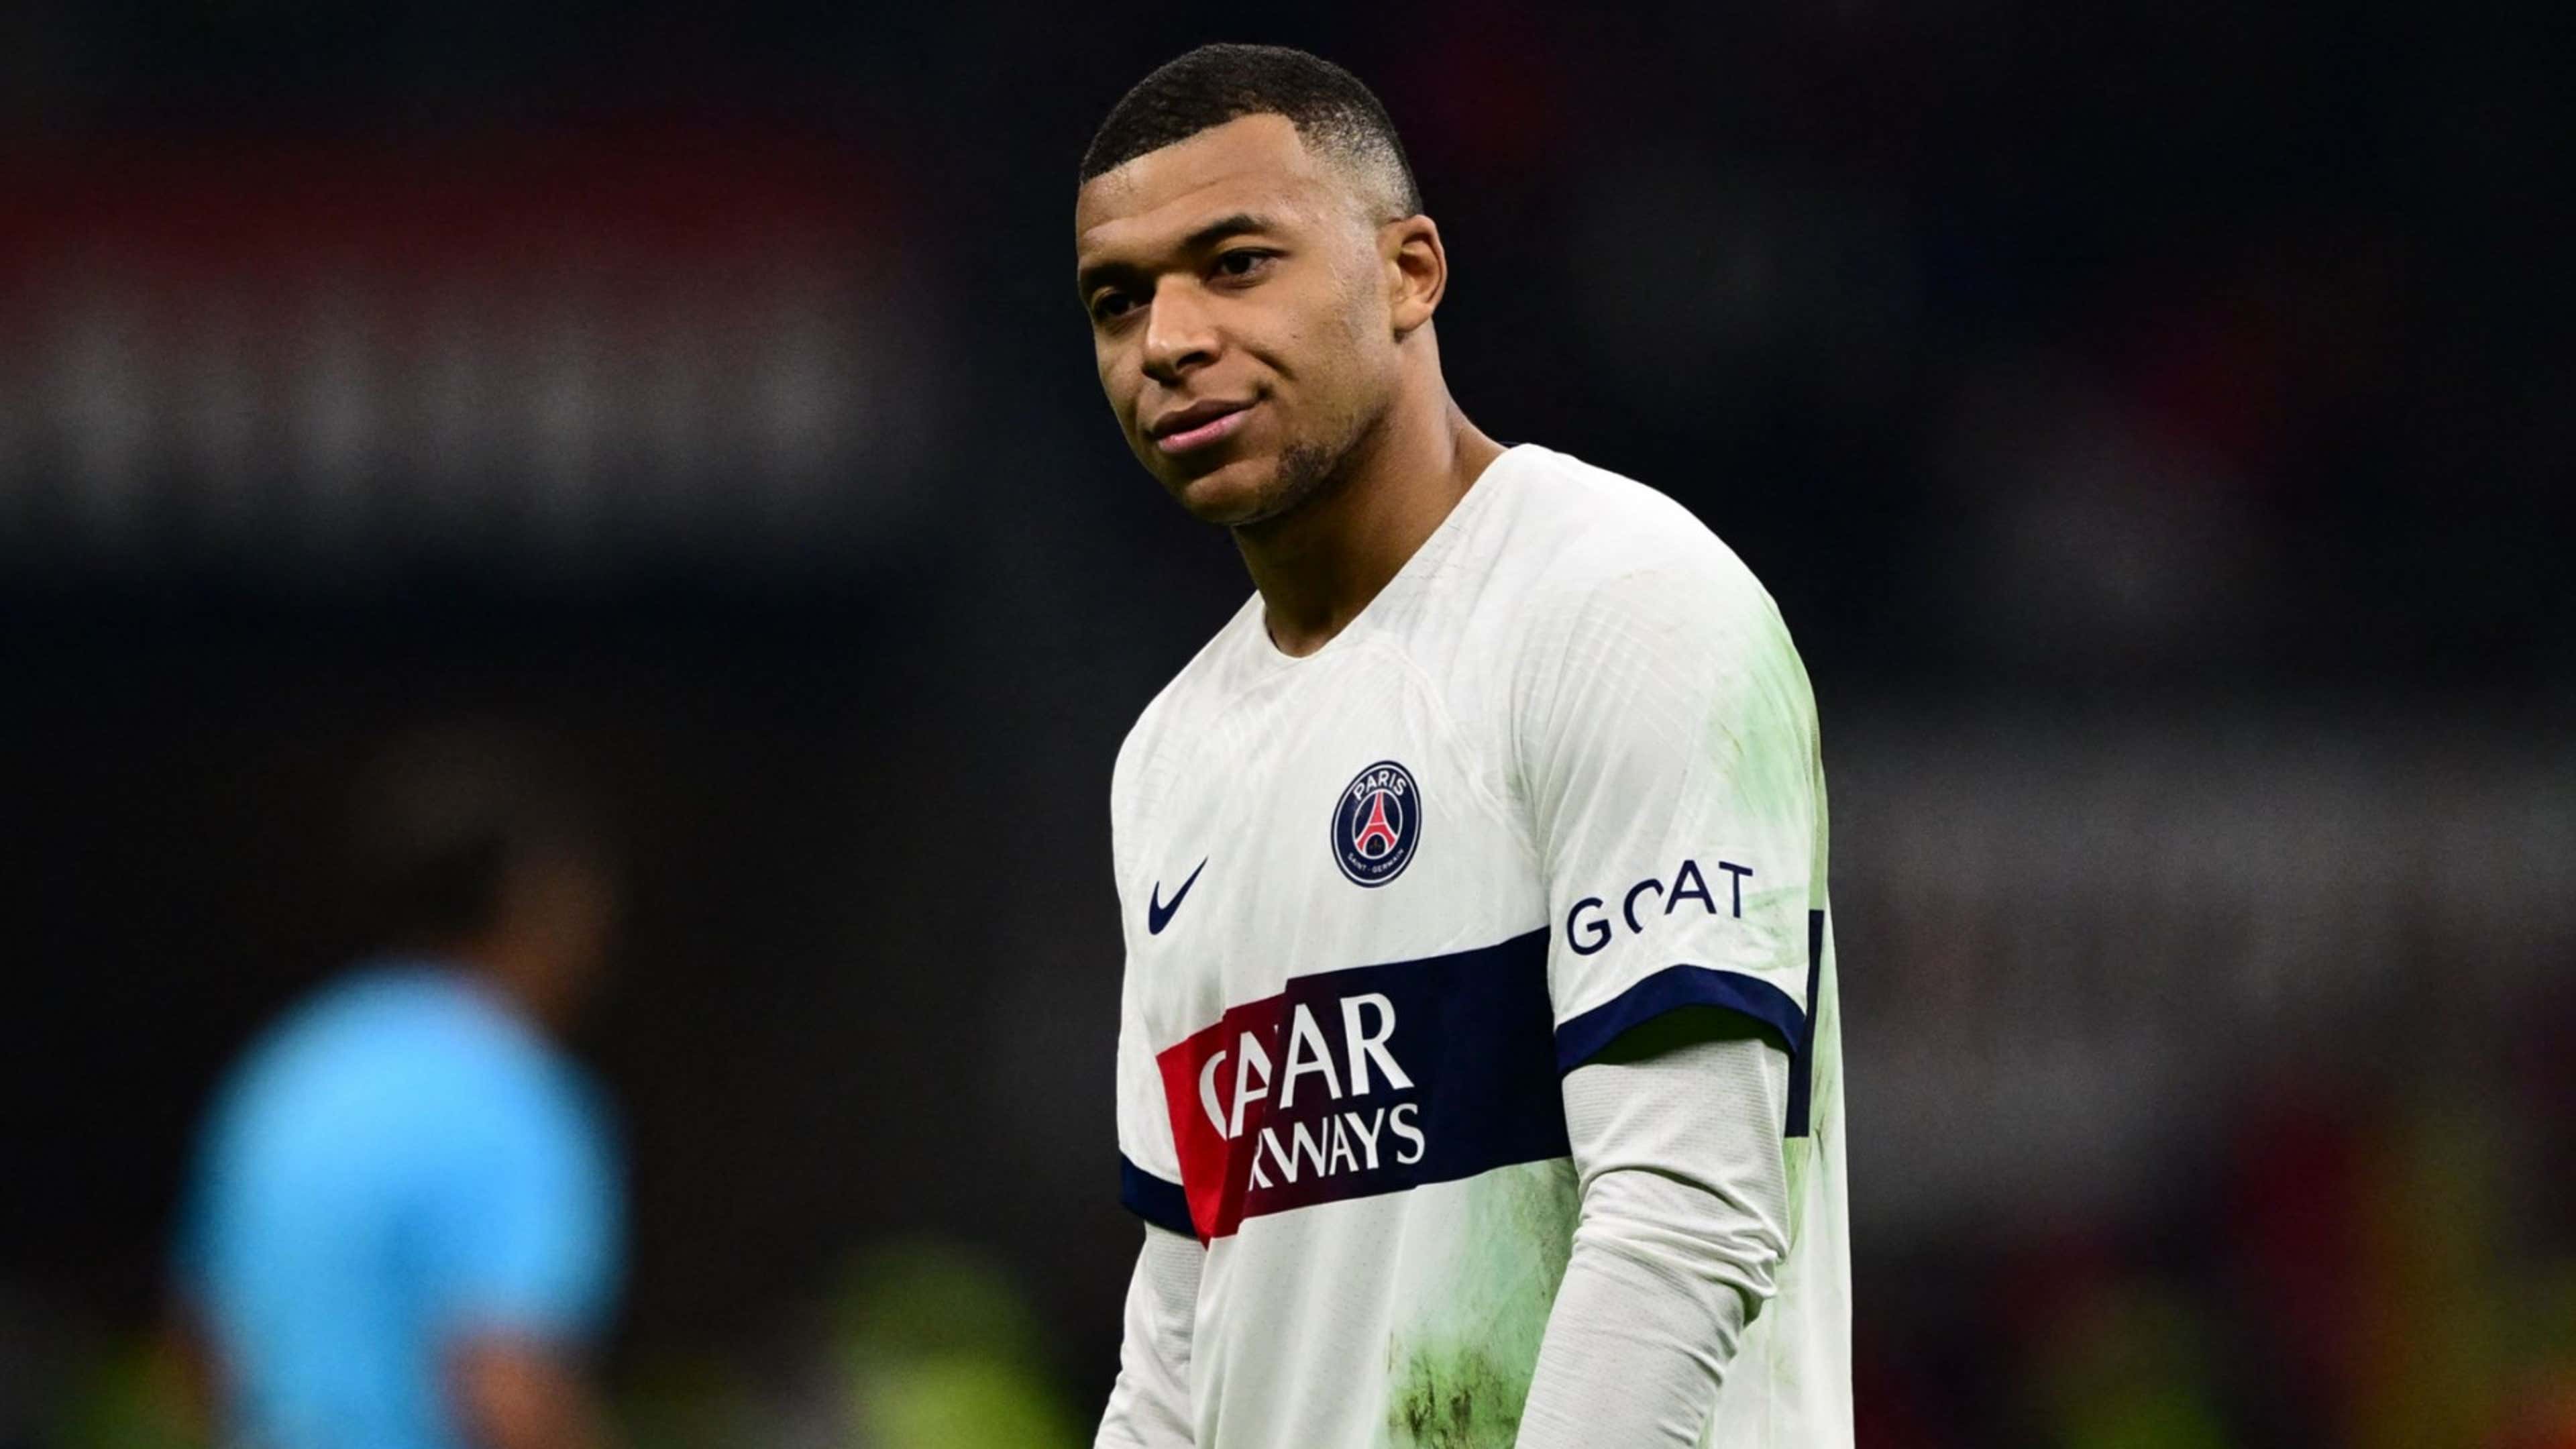 PSG gives Kylian Mbappé 2 weeks to decide on his future: 'We want him to  stay, but he can't leave for free' - Yahoo Sports